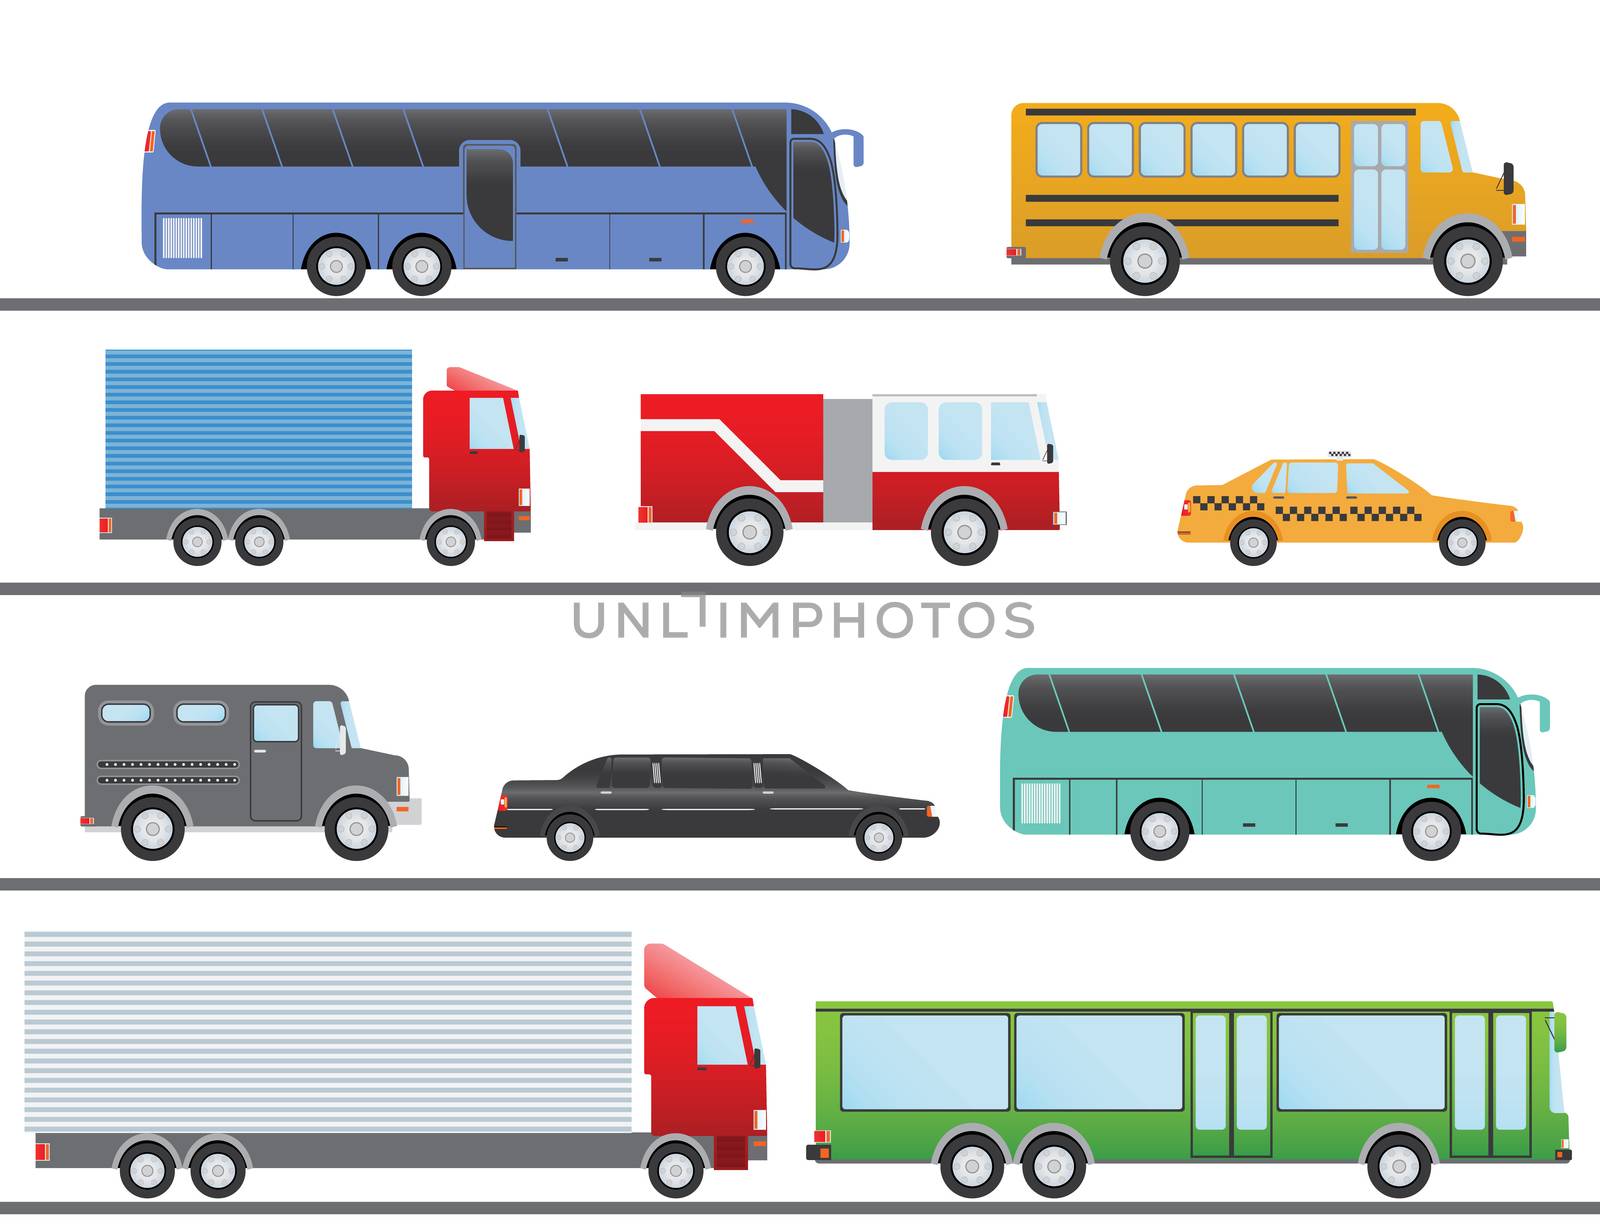 Flat design vector illustration city Transportation Flat Icons. Trucks, Bus, taxi, limo, fire truck, and school bus by Lemon_workshop